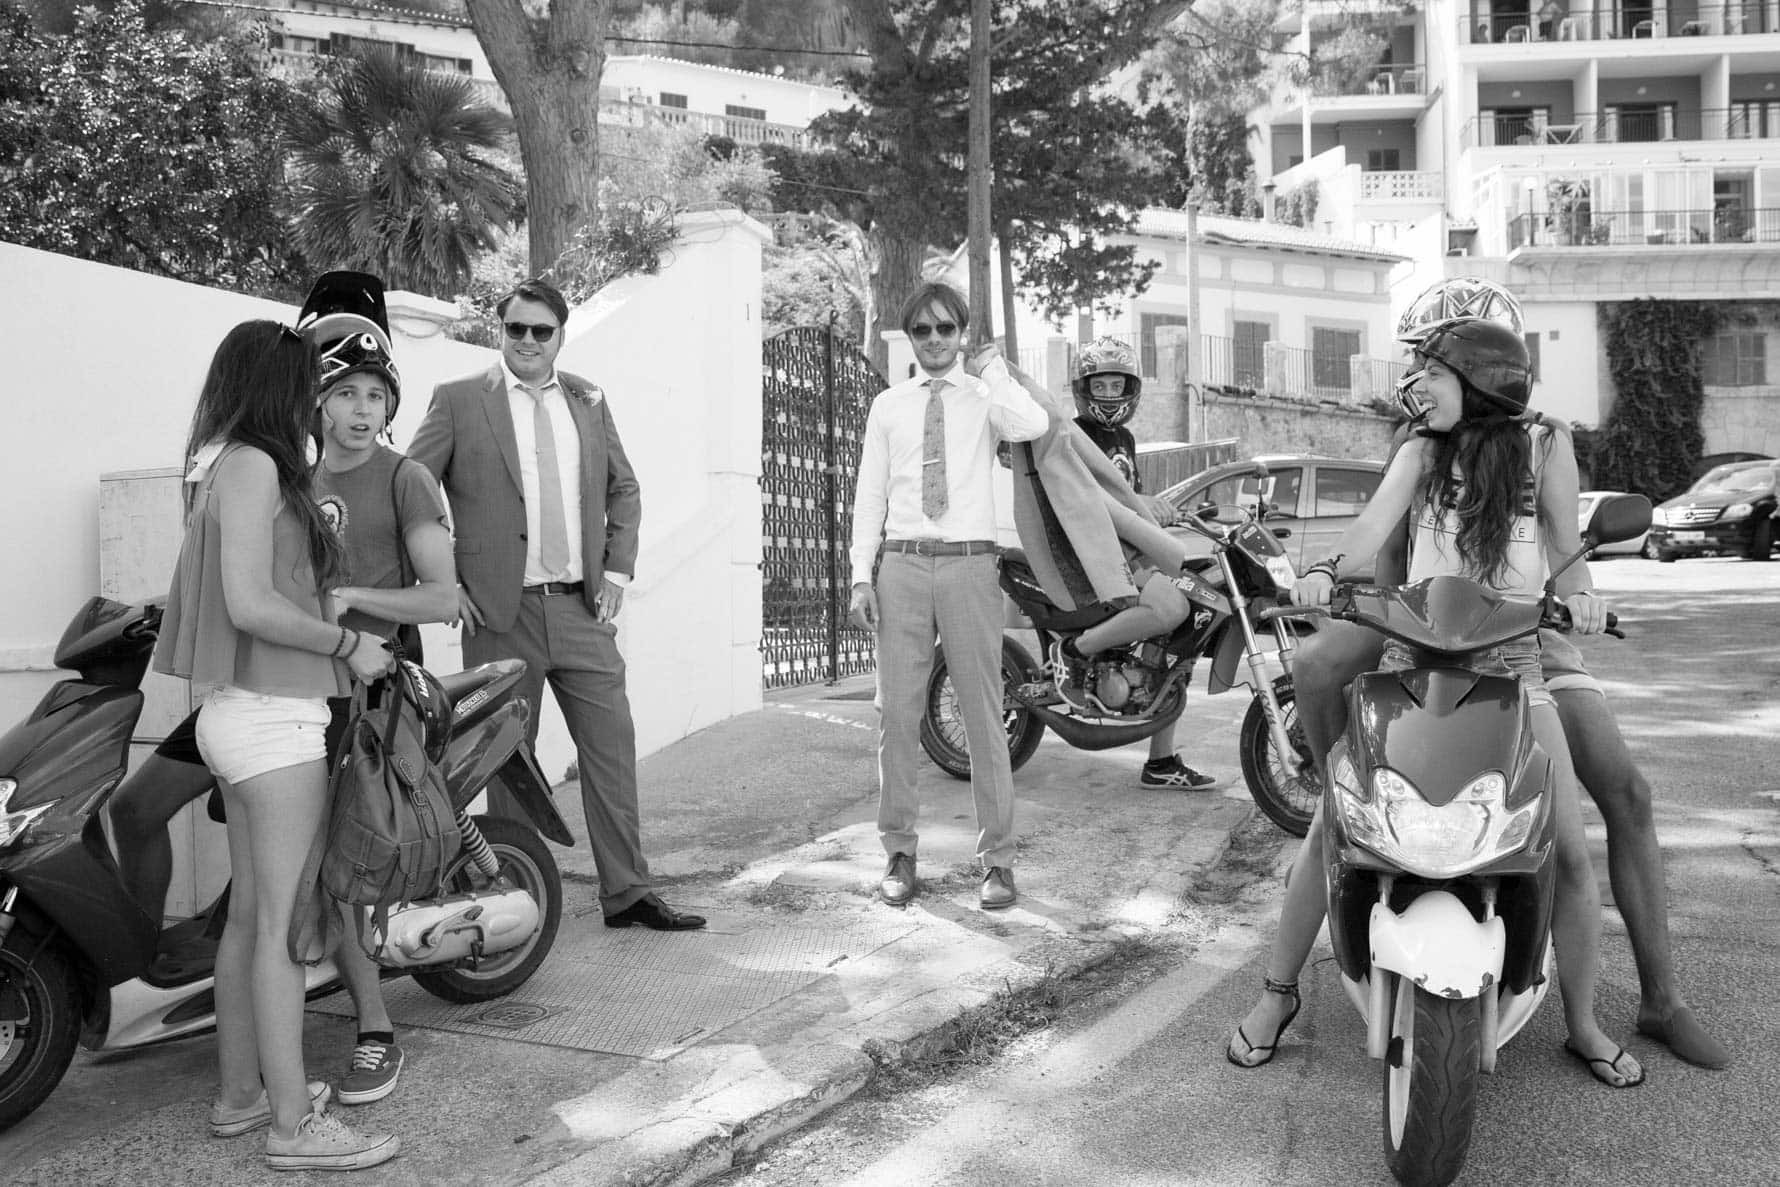 "With the scooters" by Mallorca wedding photographer in Port de Soller